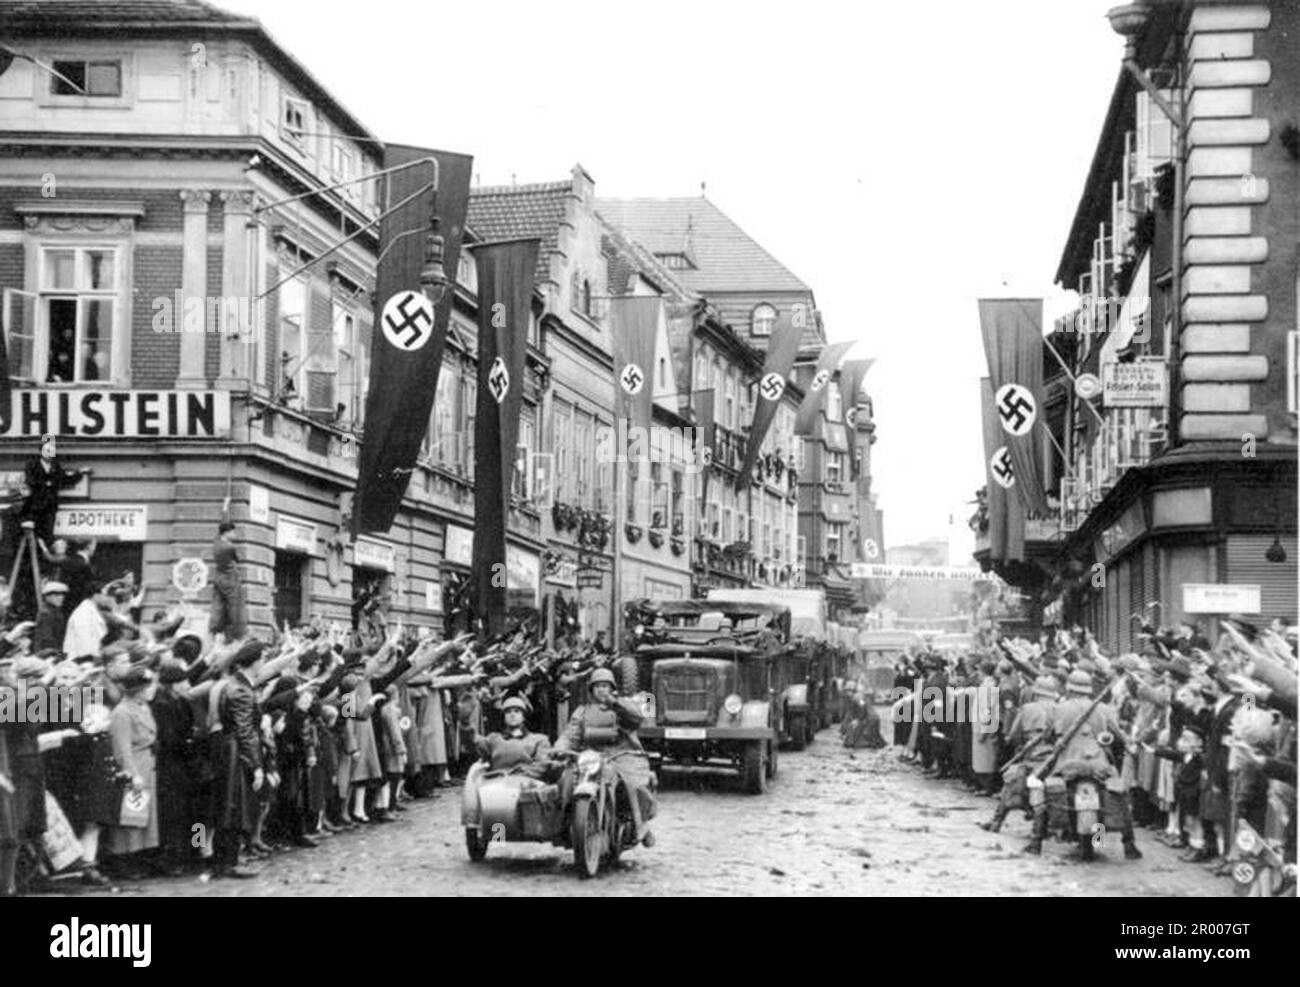 German mechanized troops enter Saaz in Czechoslovakia after the annexation of the Sudetenland. After the annexation of Austria, Hitler demanded that he be given the Sudeten region of Czechoslovakia. At the Munich conference in September 1938 the Western powers agreed to this and the nazis occupied the area. Not long after Hitler broke his promise and invaded the rest of Czechoslovakia before turning his attention to Poland. Bundesarchiv, Bild 146-1970-005-28 / CC-BY-SA 3.0 Stock Photo